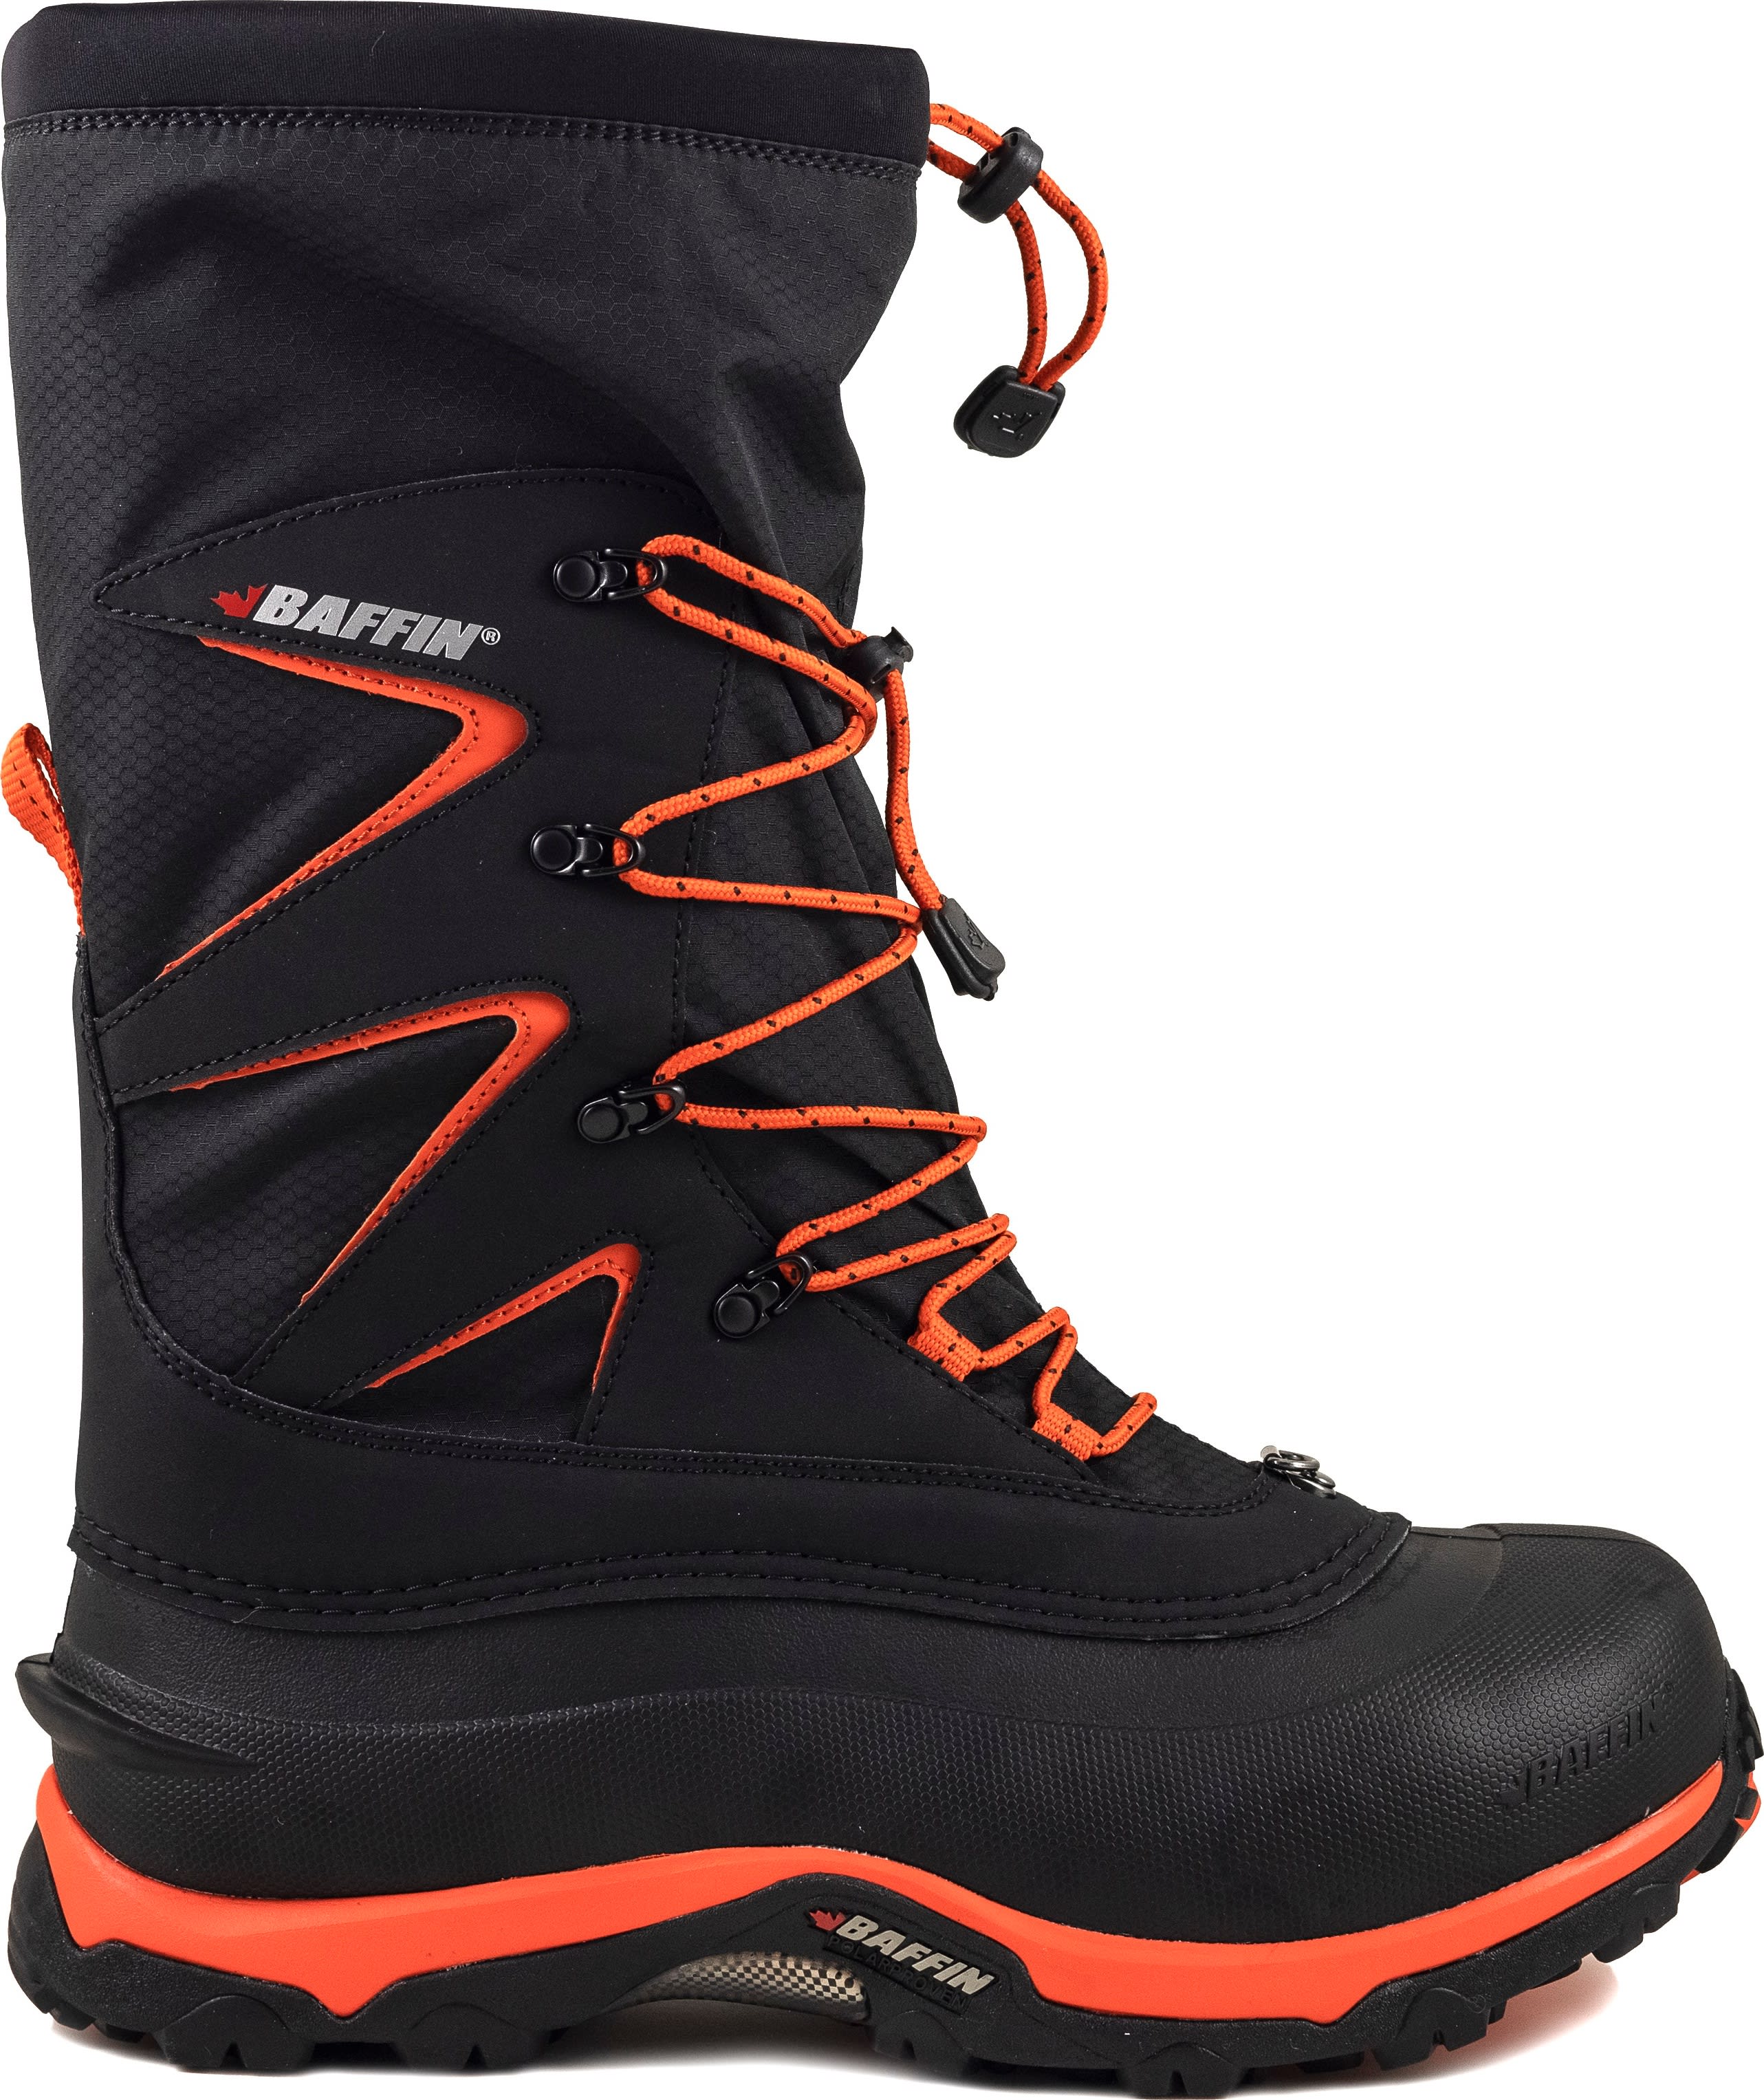 Buy Baffin Kootenay from Outnorth